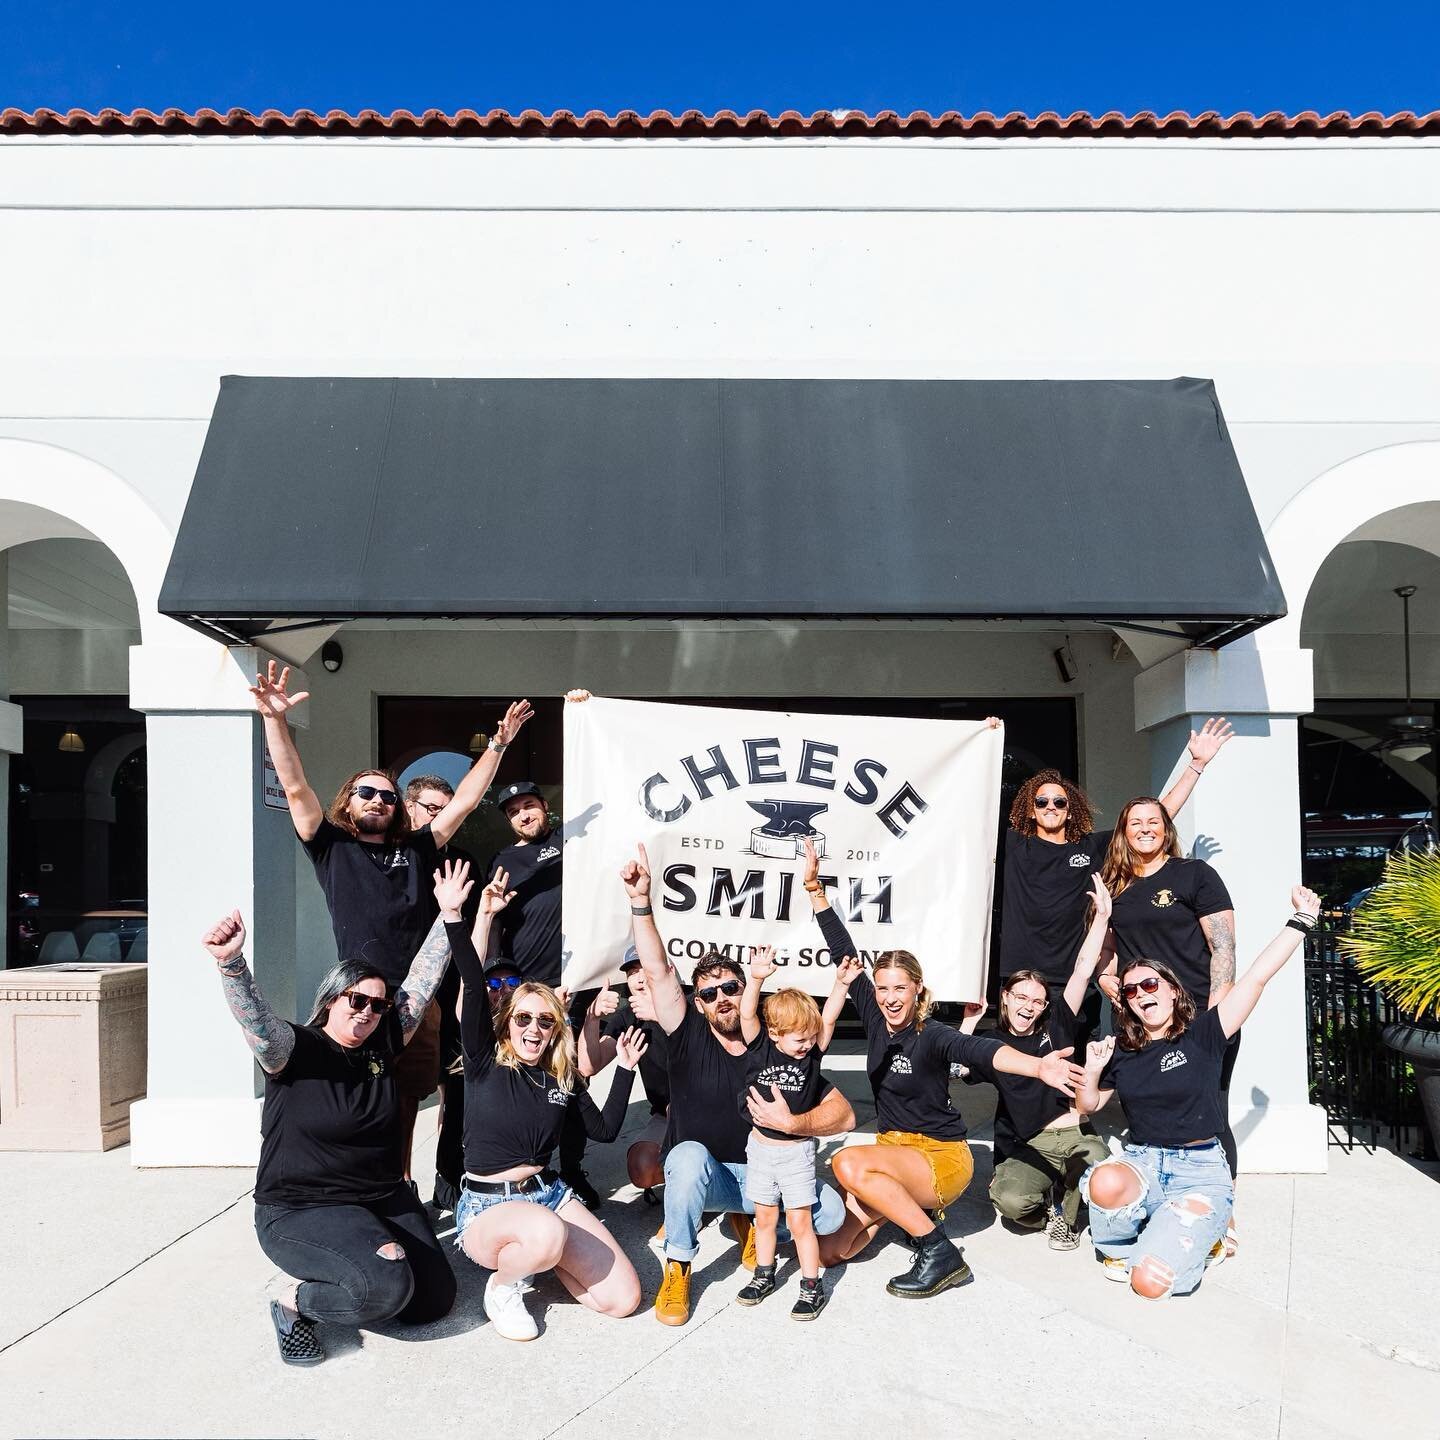 CHEESESMITH #2 COMING SOON!!! 

🥪 🥪 🥪 🥪 🥪 🥪 🥪 🥪 🥪 🥪 

Our second CheeseSmith location will be located at 1319 Military Cutoff Road in the Landfall shopping center. We&rsquo;re working hard to open doors August/September of 2023. Endless par